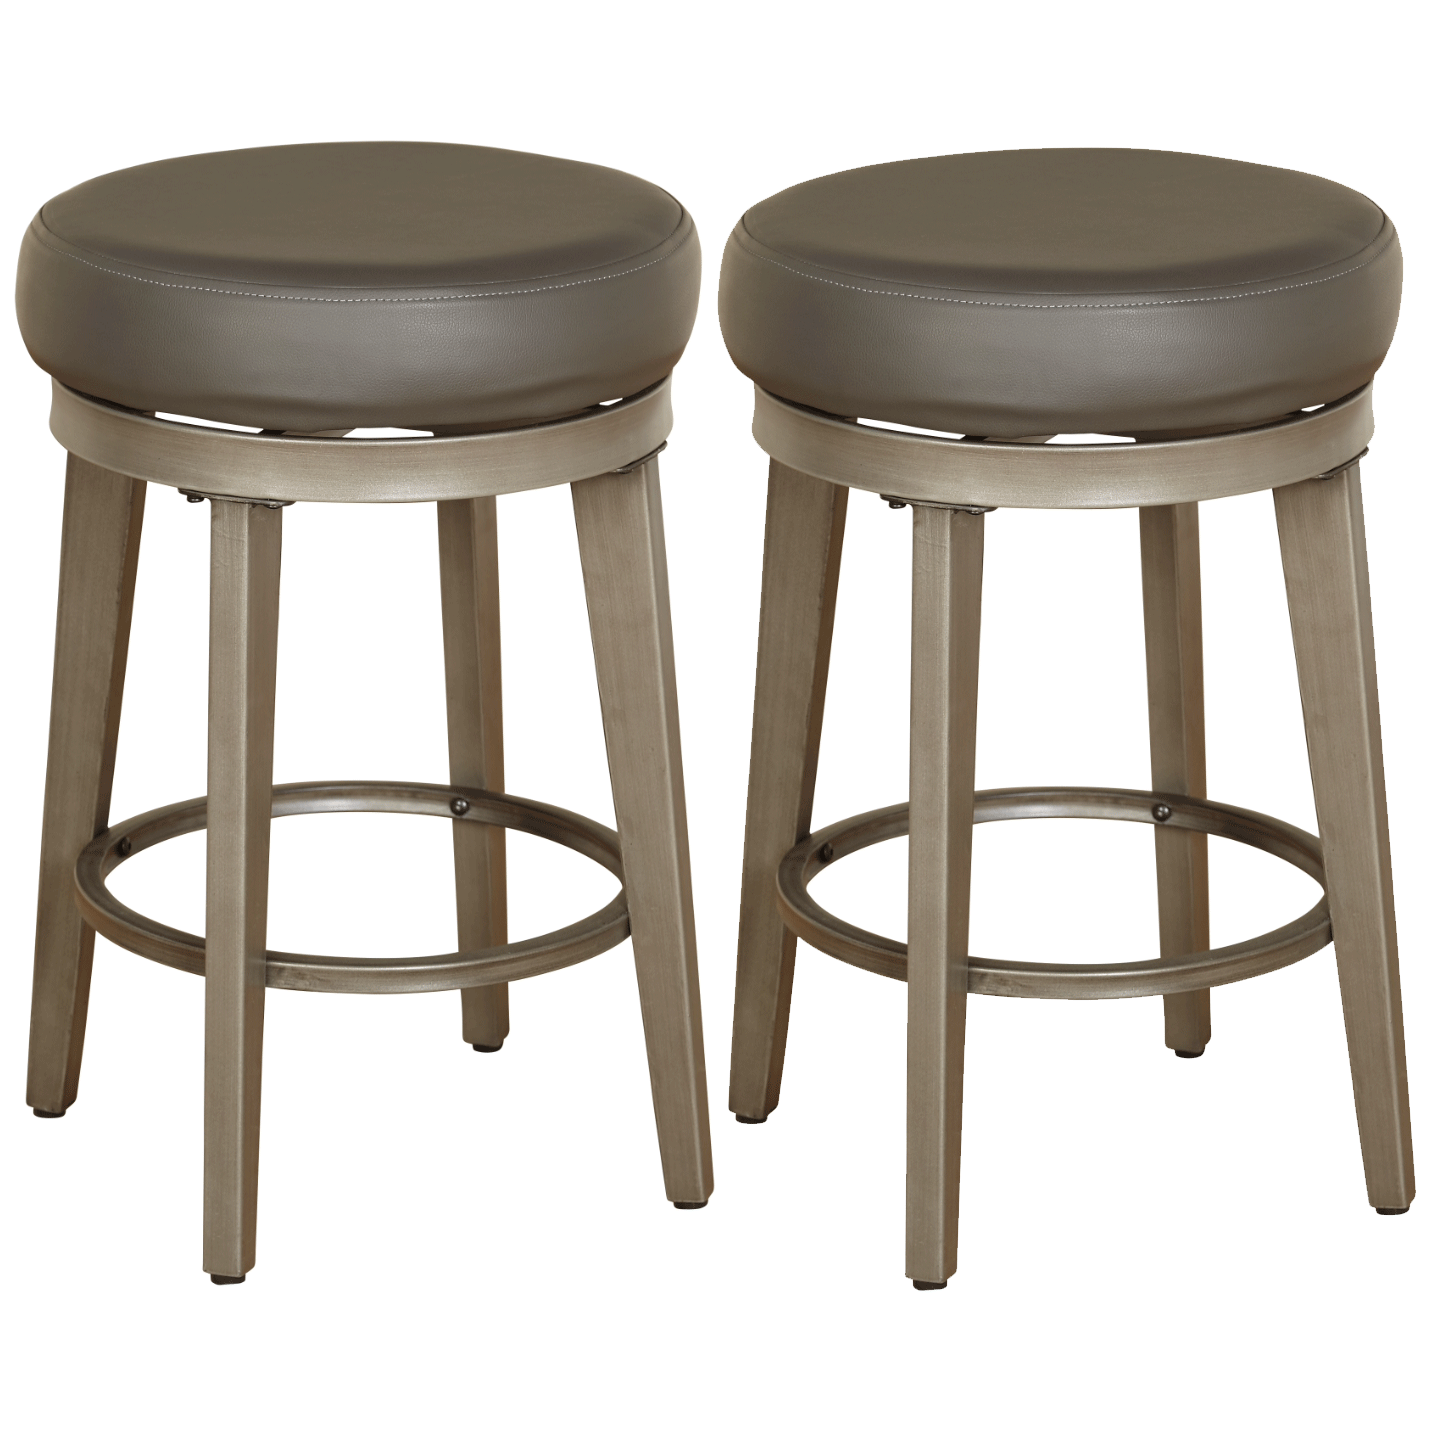 angelo:HOME Swivel Stools - Linden Leather set of 2 (grey) - angelo:HOME